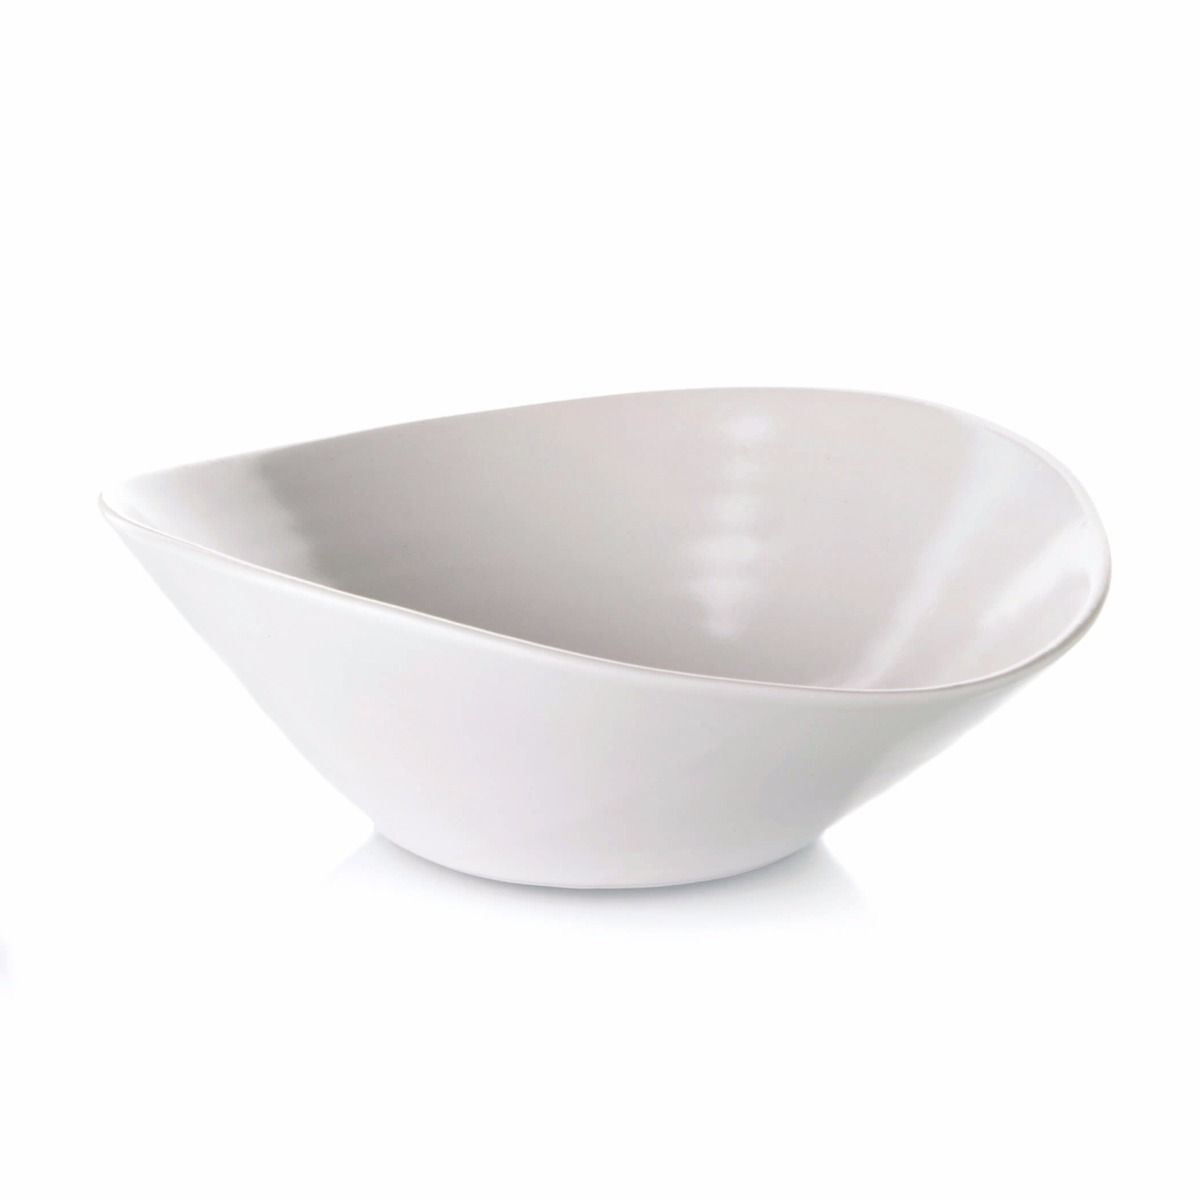 SIMON PEARCE PASTA BOWL BARRE (Available in 2 Colors)